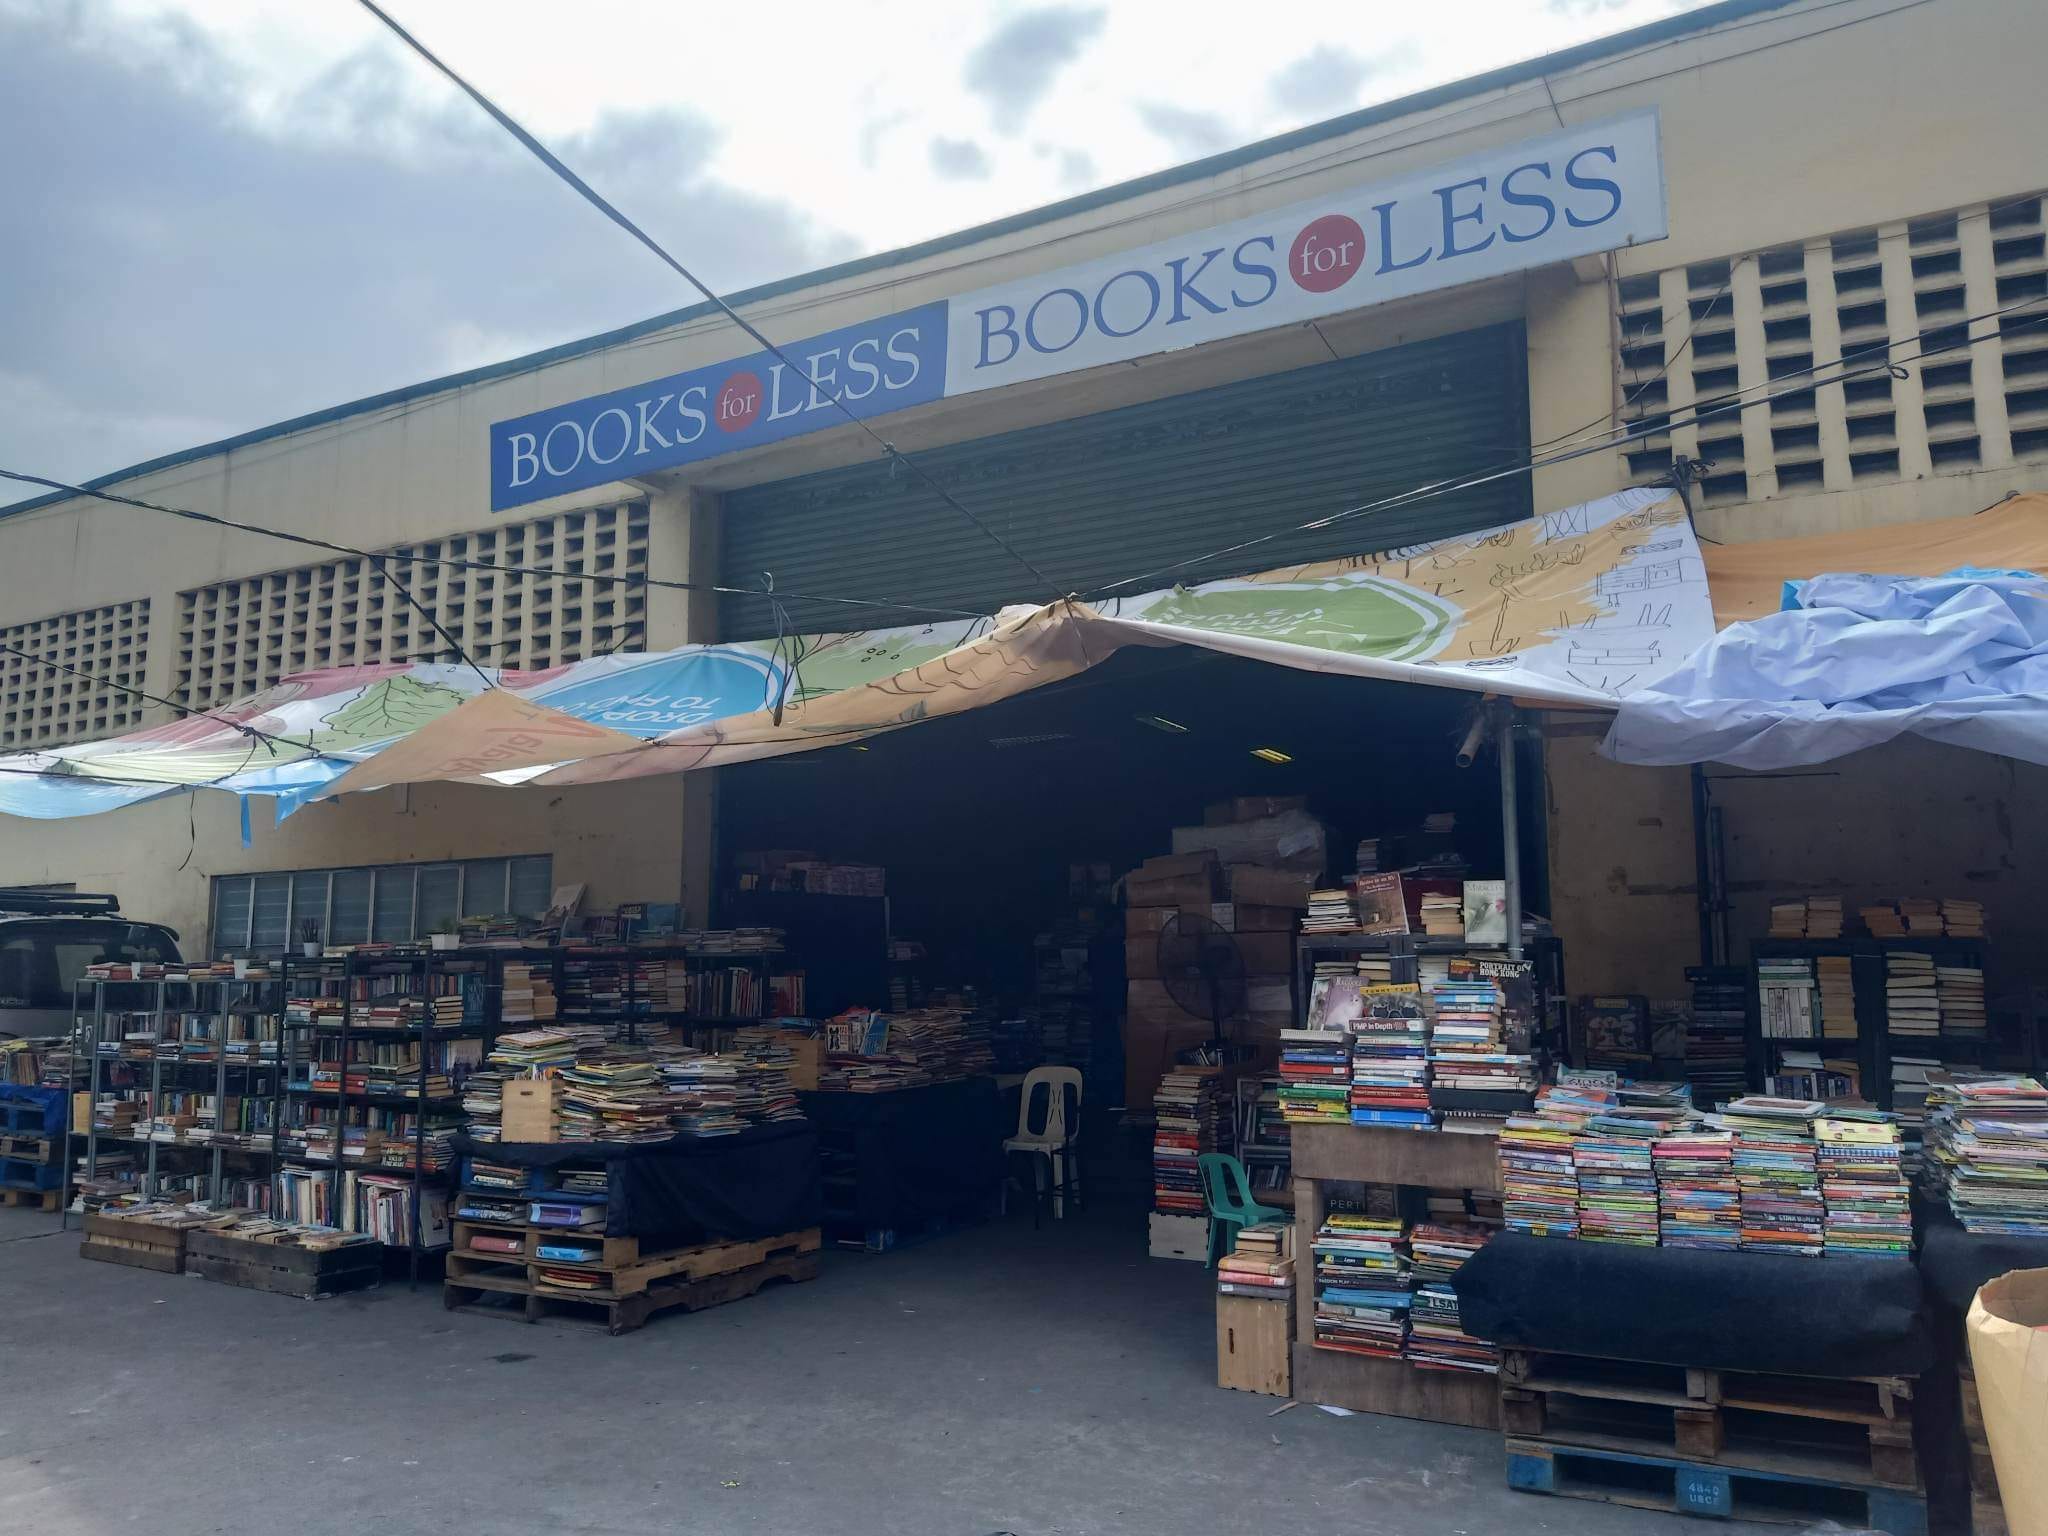 Inside the warehouse of books for less